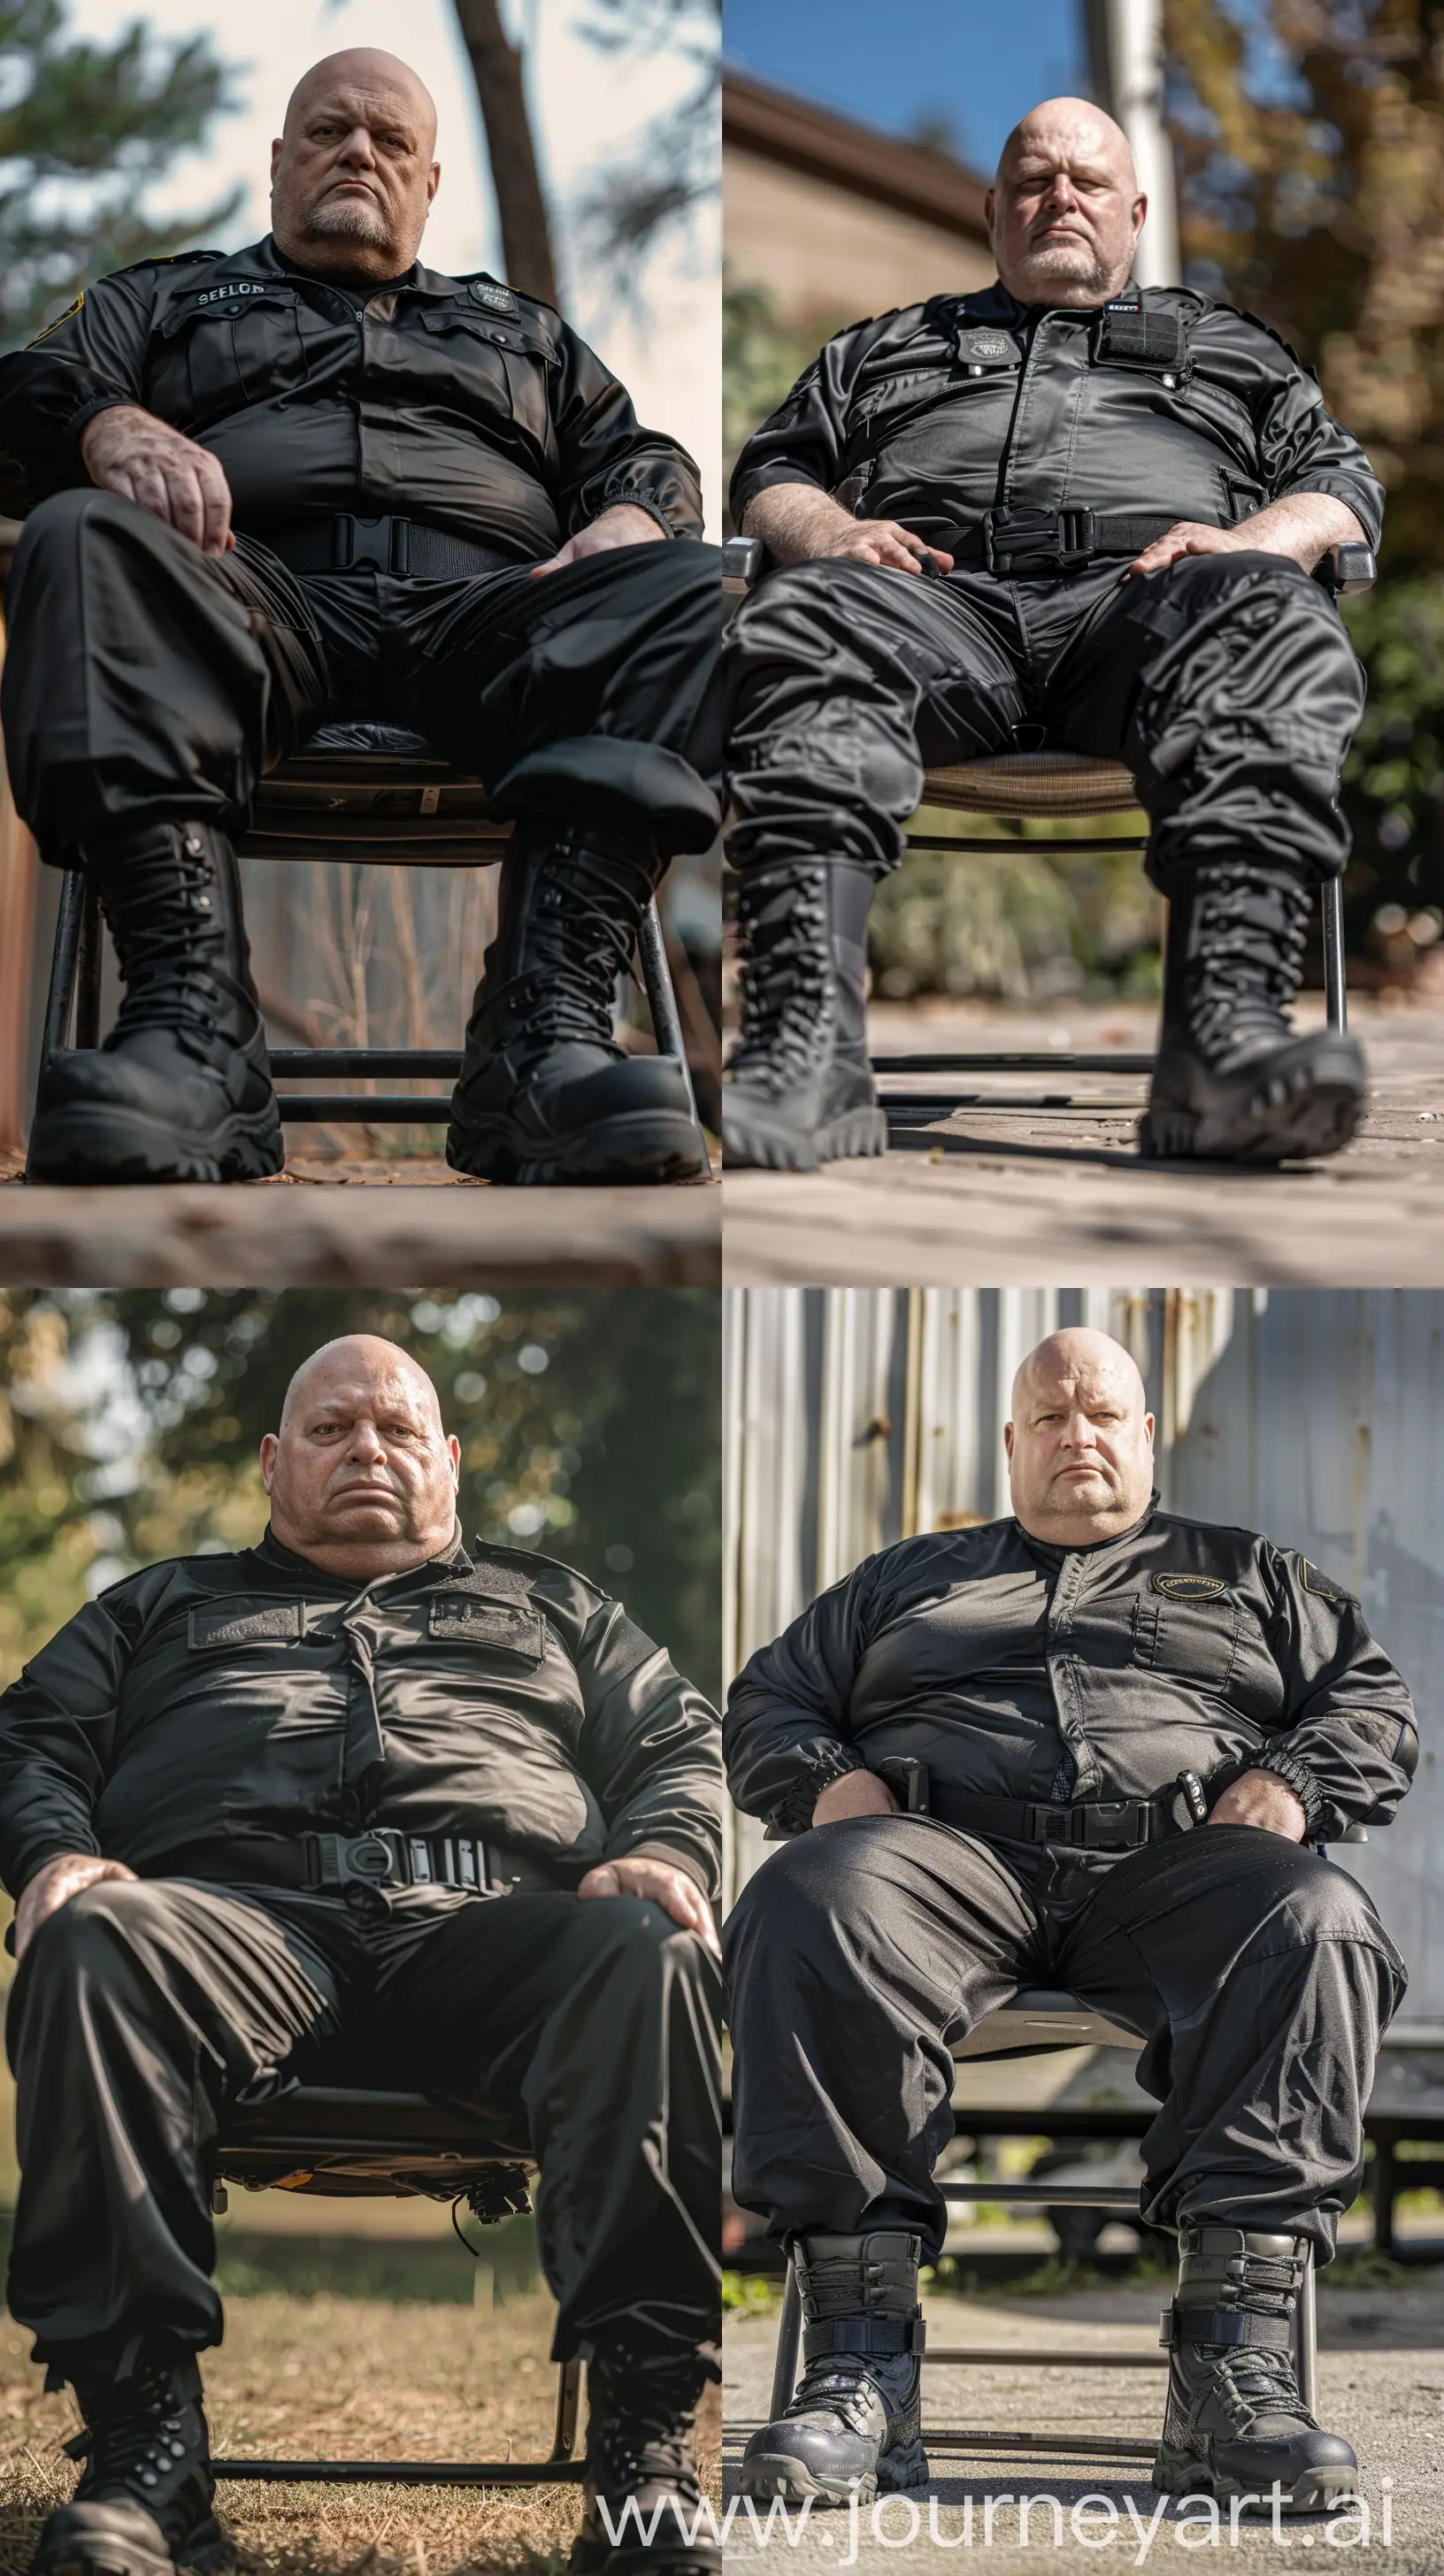 Elderly-Security-Guard-Relaxing-Outdoors-in-Black-Tactical-Attire